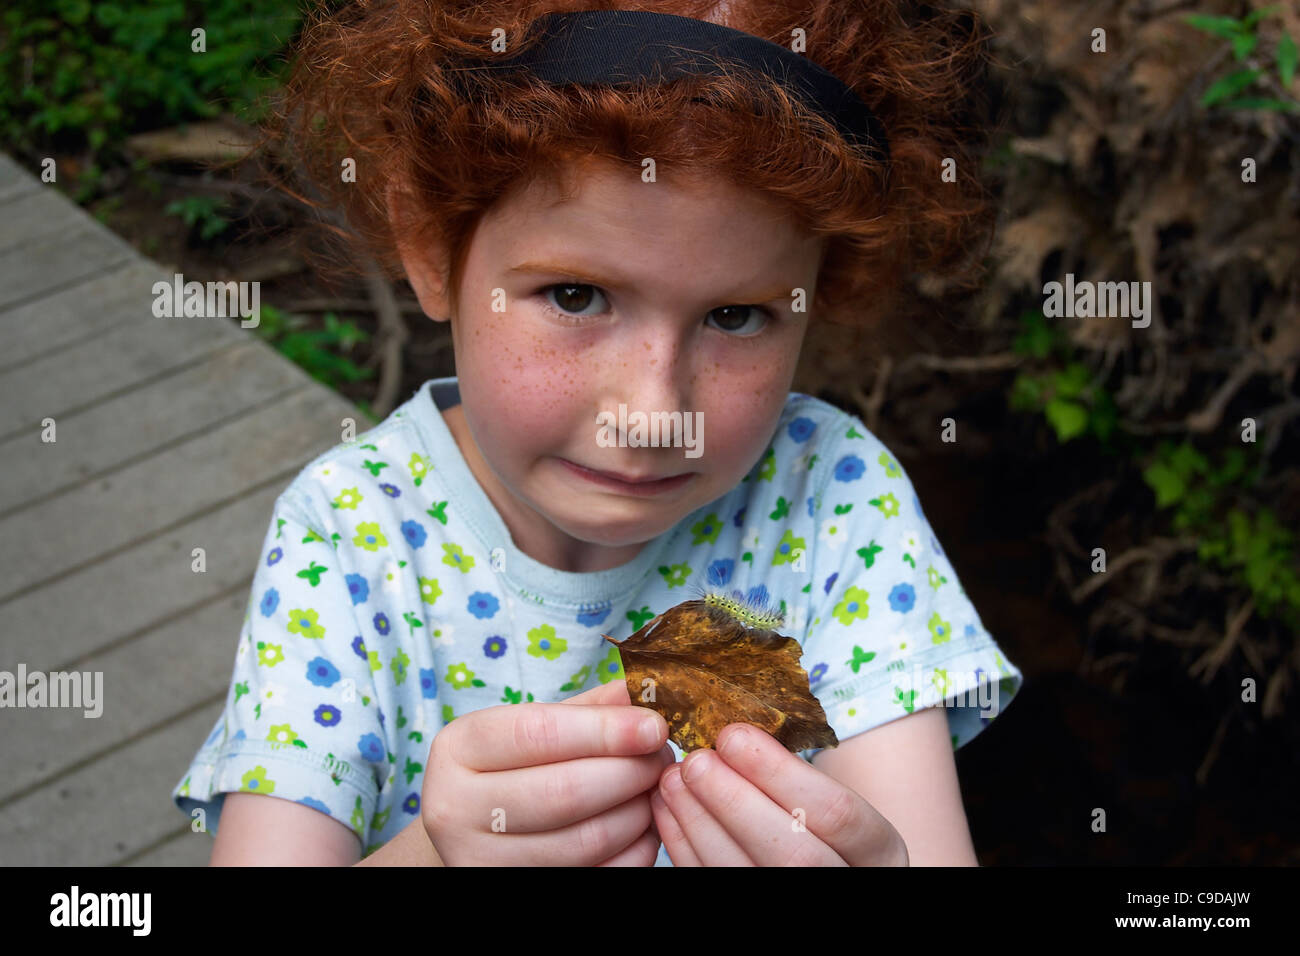 A young girl warily displays a found caterpillar. Stock Photo